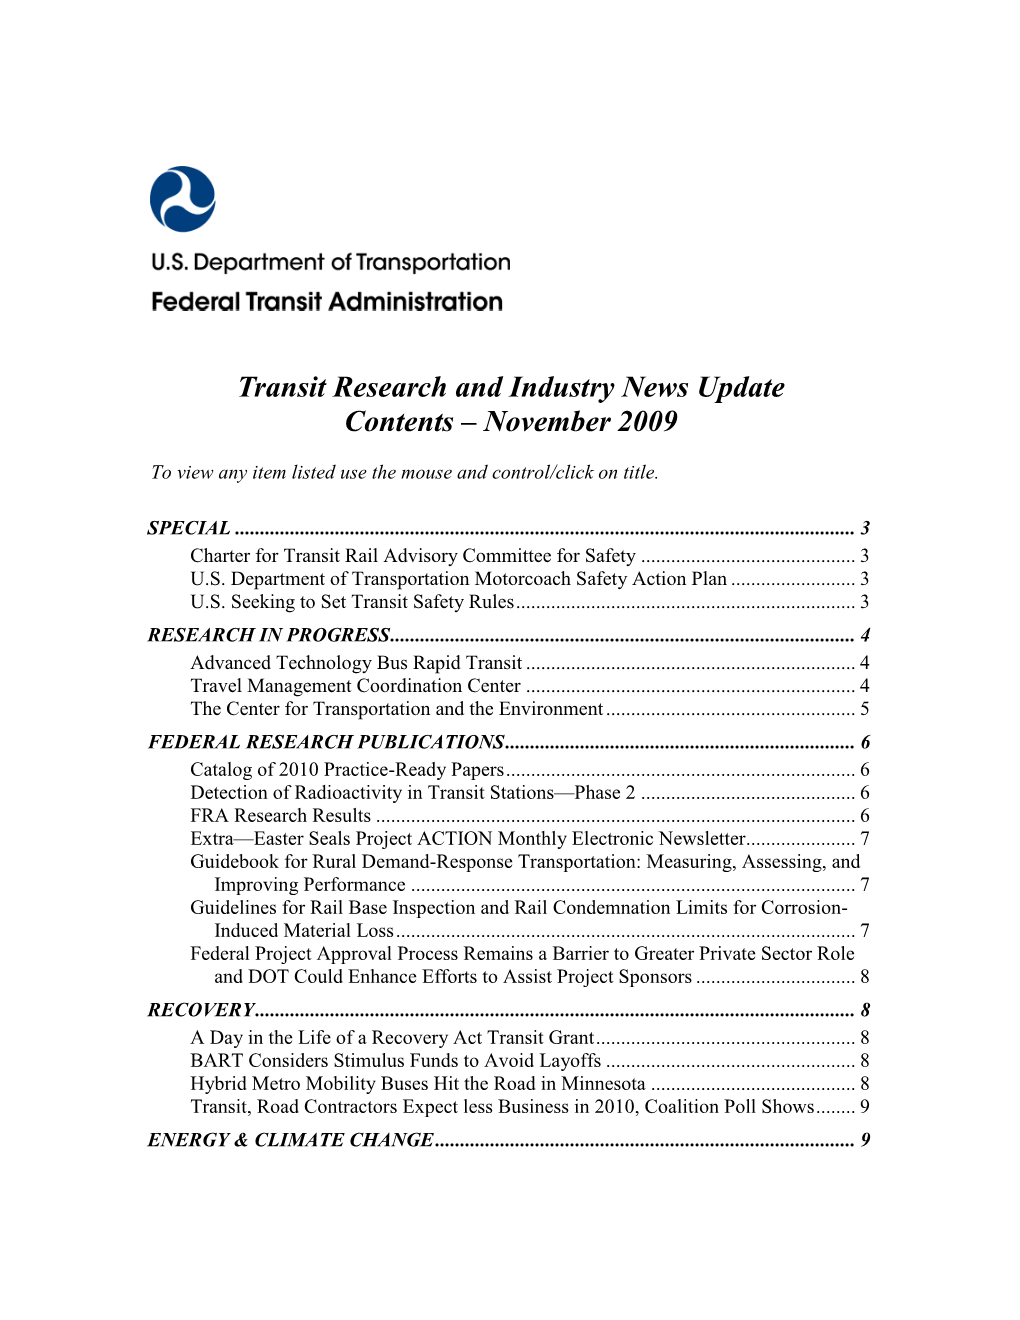 Transit Research and Industry News Update Contents – November 2009